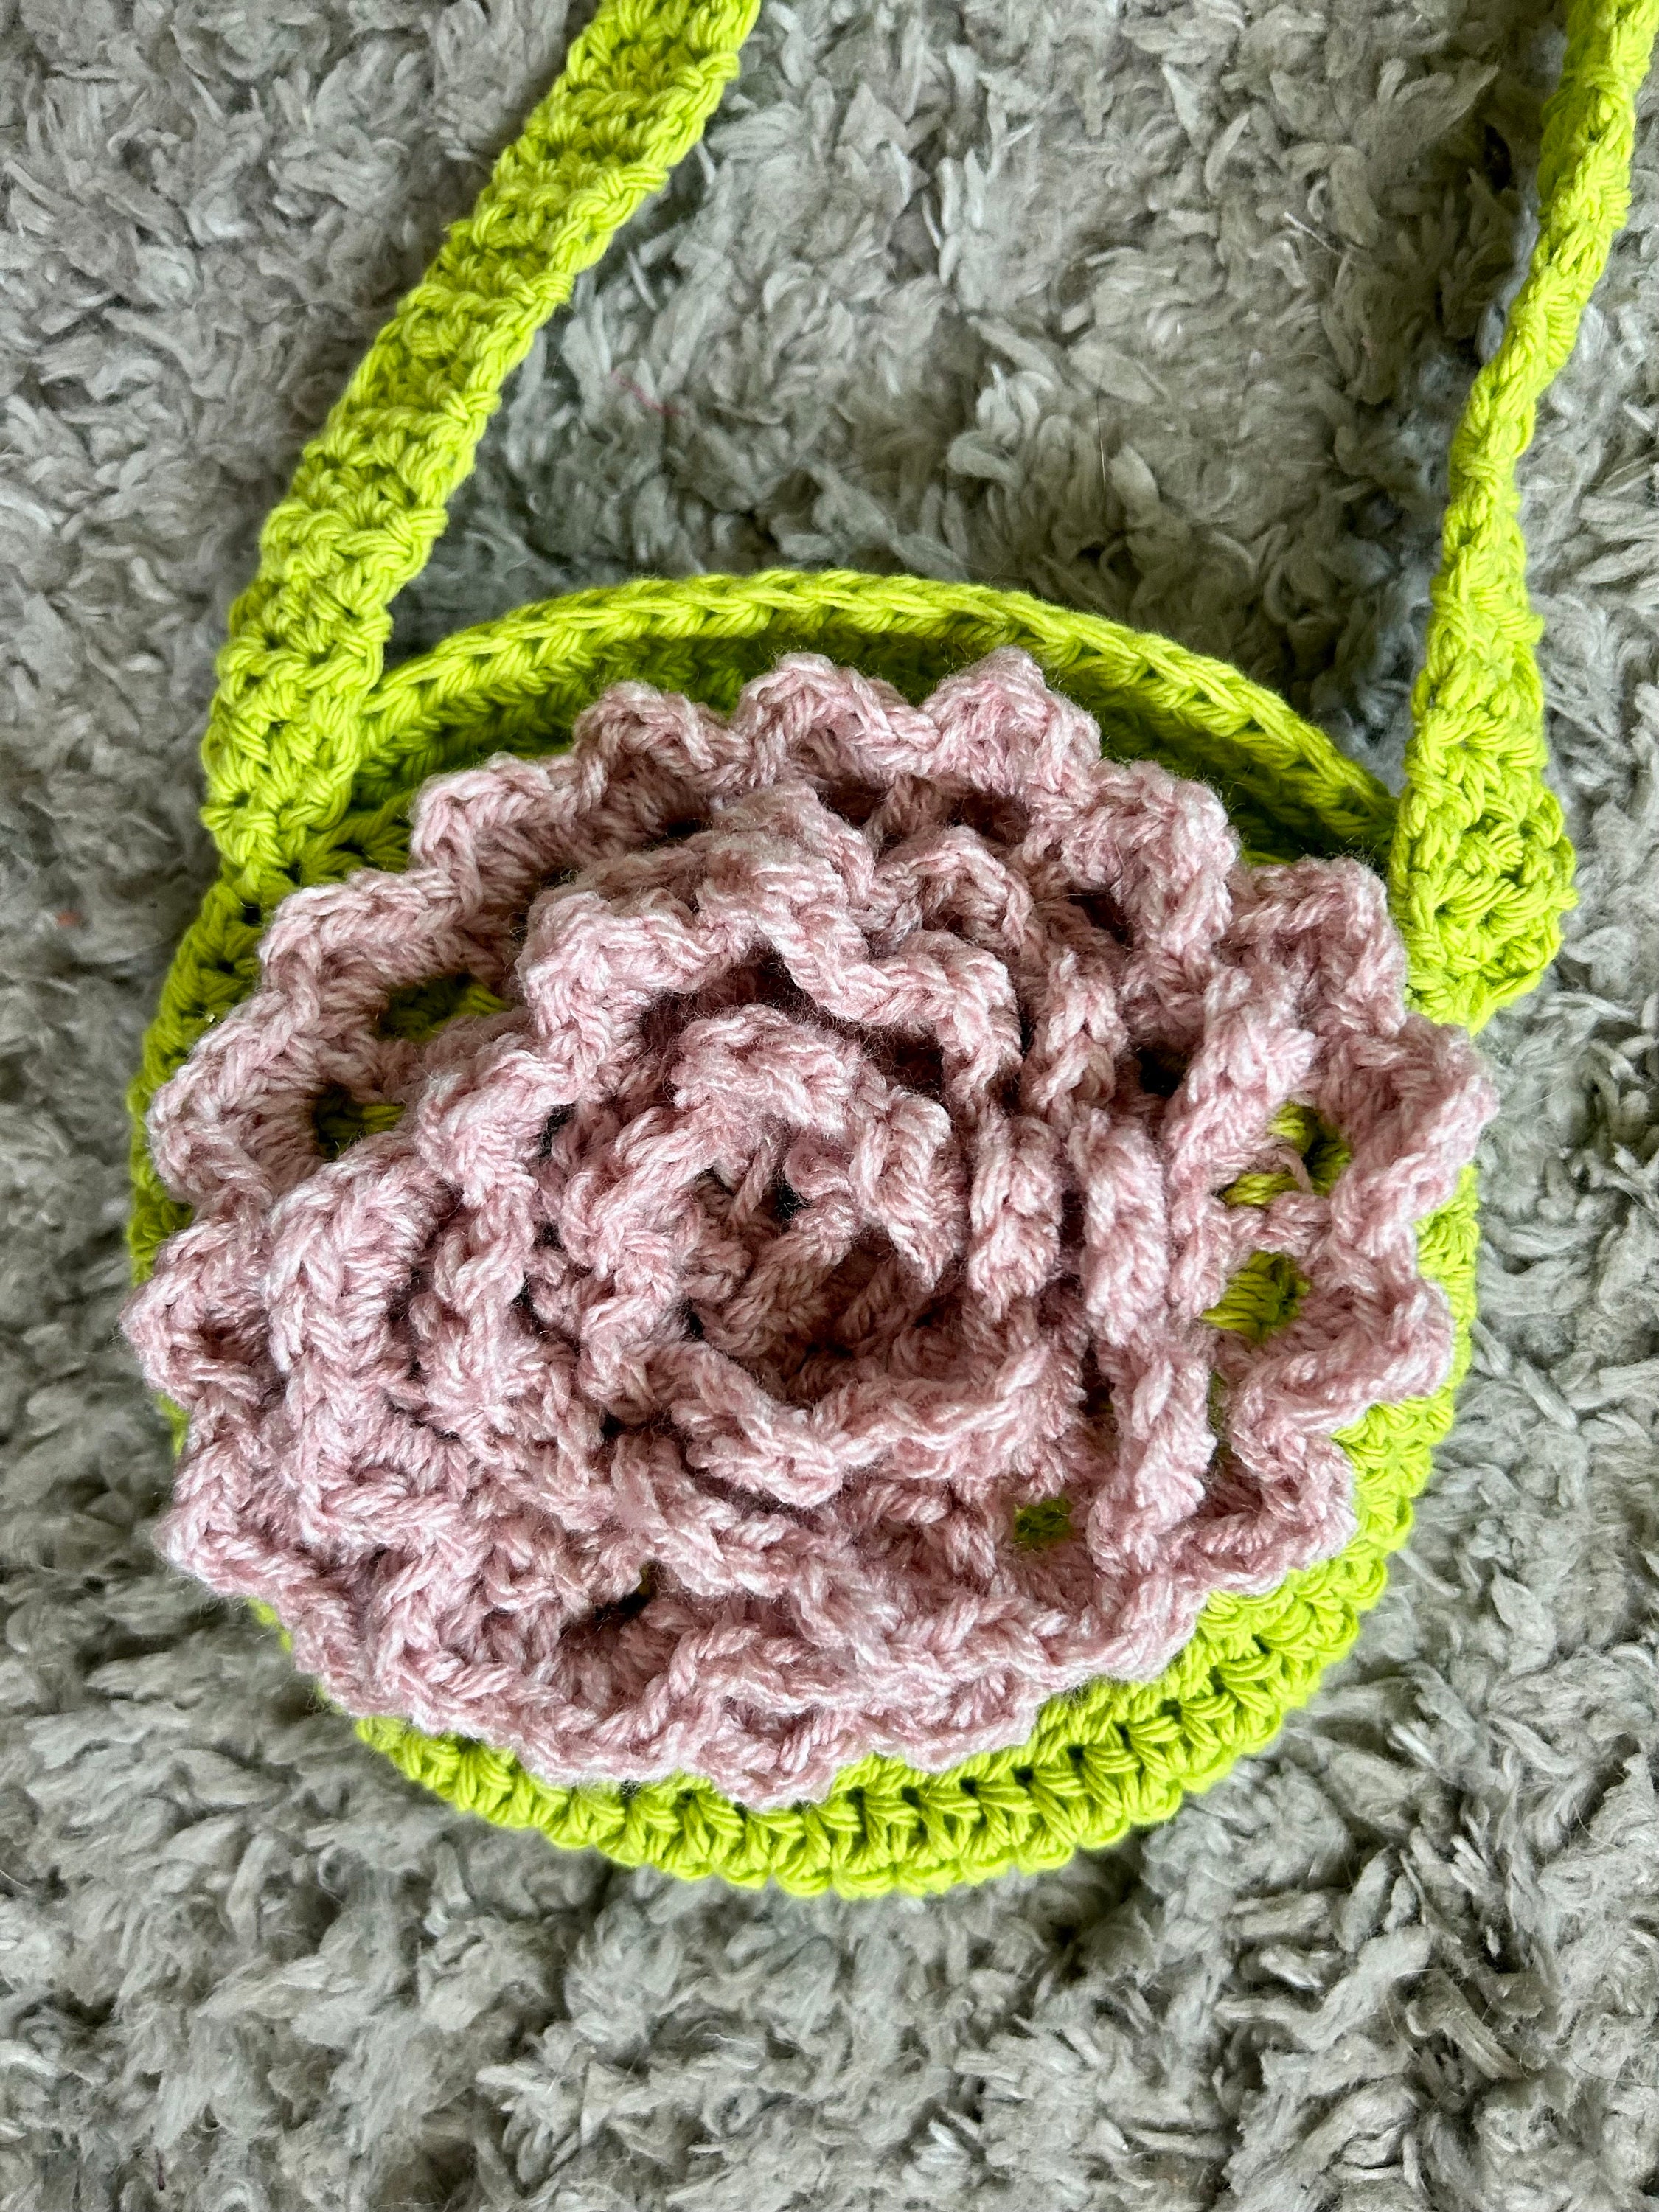 Crochet Louis Vuitton inspired Bag Strap Pattern - Lovely Loops by  Christine's Ko-fi Shop - Ko-fi ❤️ Where creators get support from fans  through donations, memberships, shop sales and more! The original 